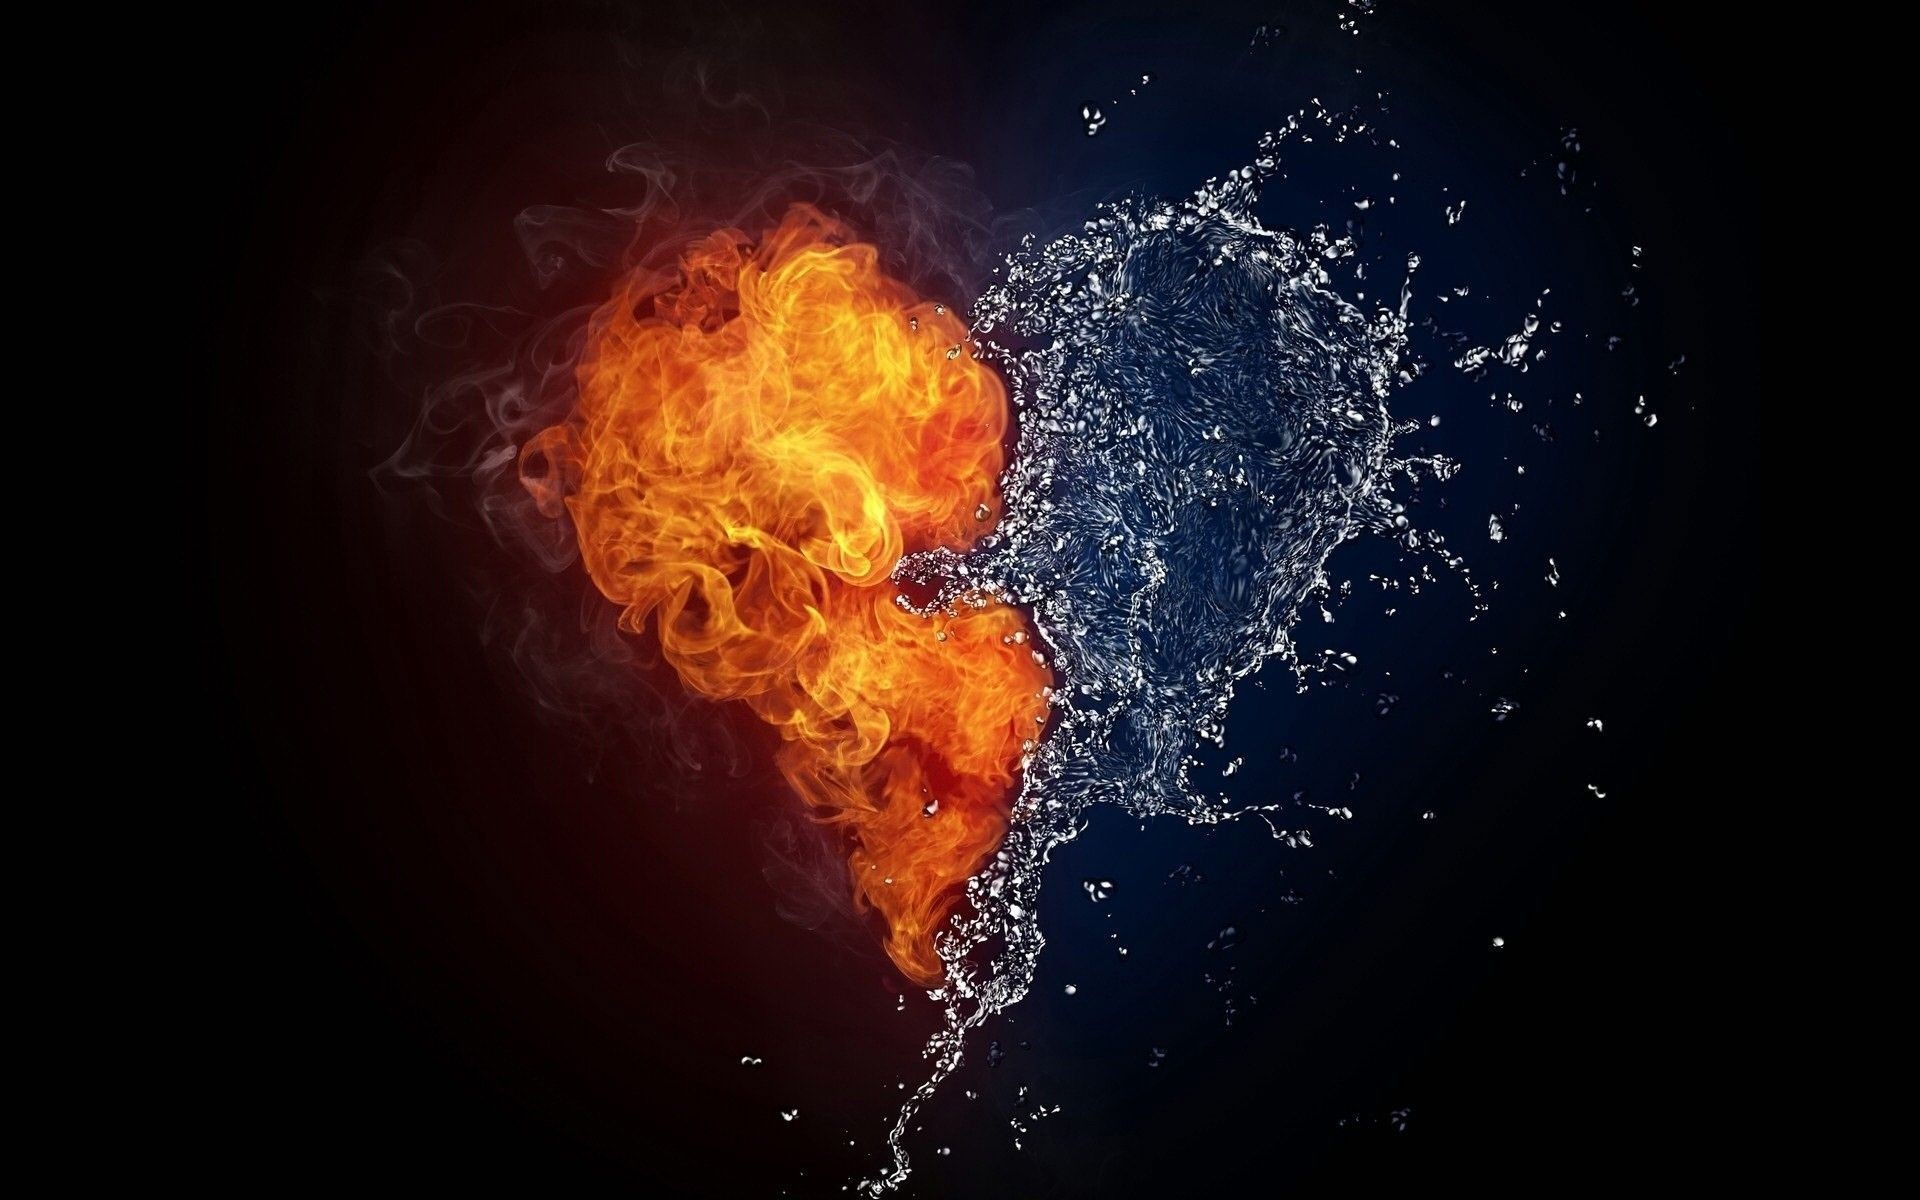 Love fire wallpapers, Passionate flames, Fiery love symbolism, Romantic fire moments, Burning love, 1920x1200 HD Desktop